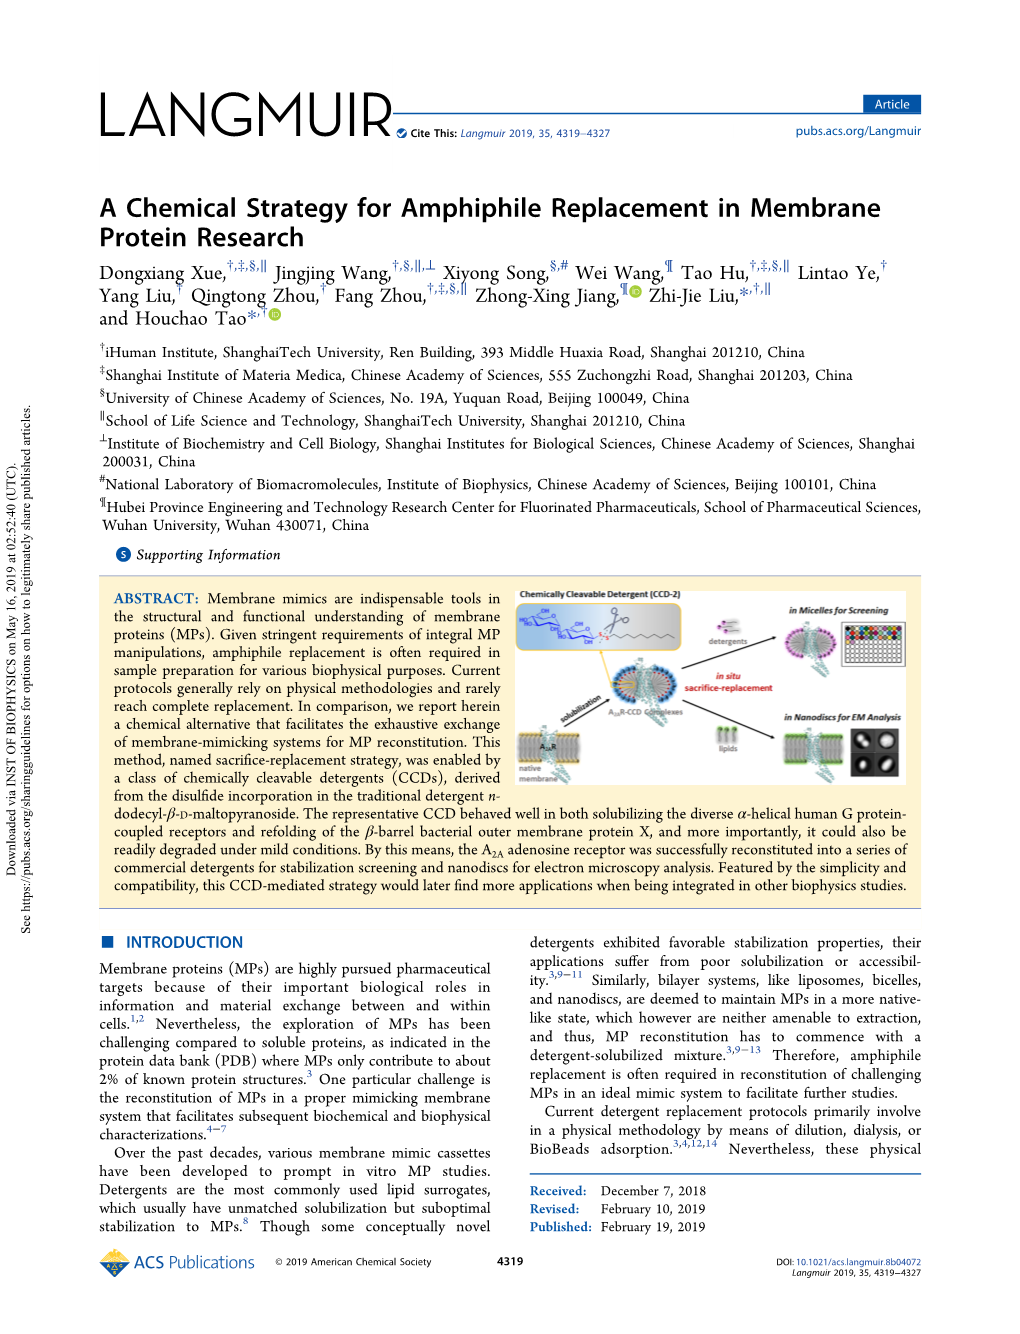 A Chemical Strategy for Amphiphile Replacement in Membrane Protein